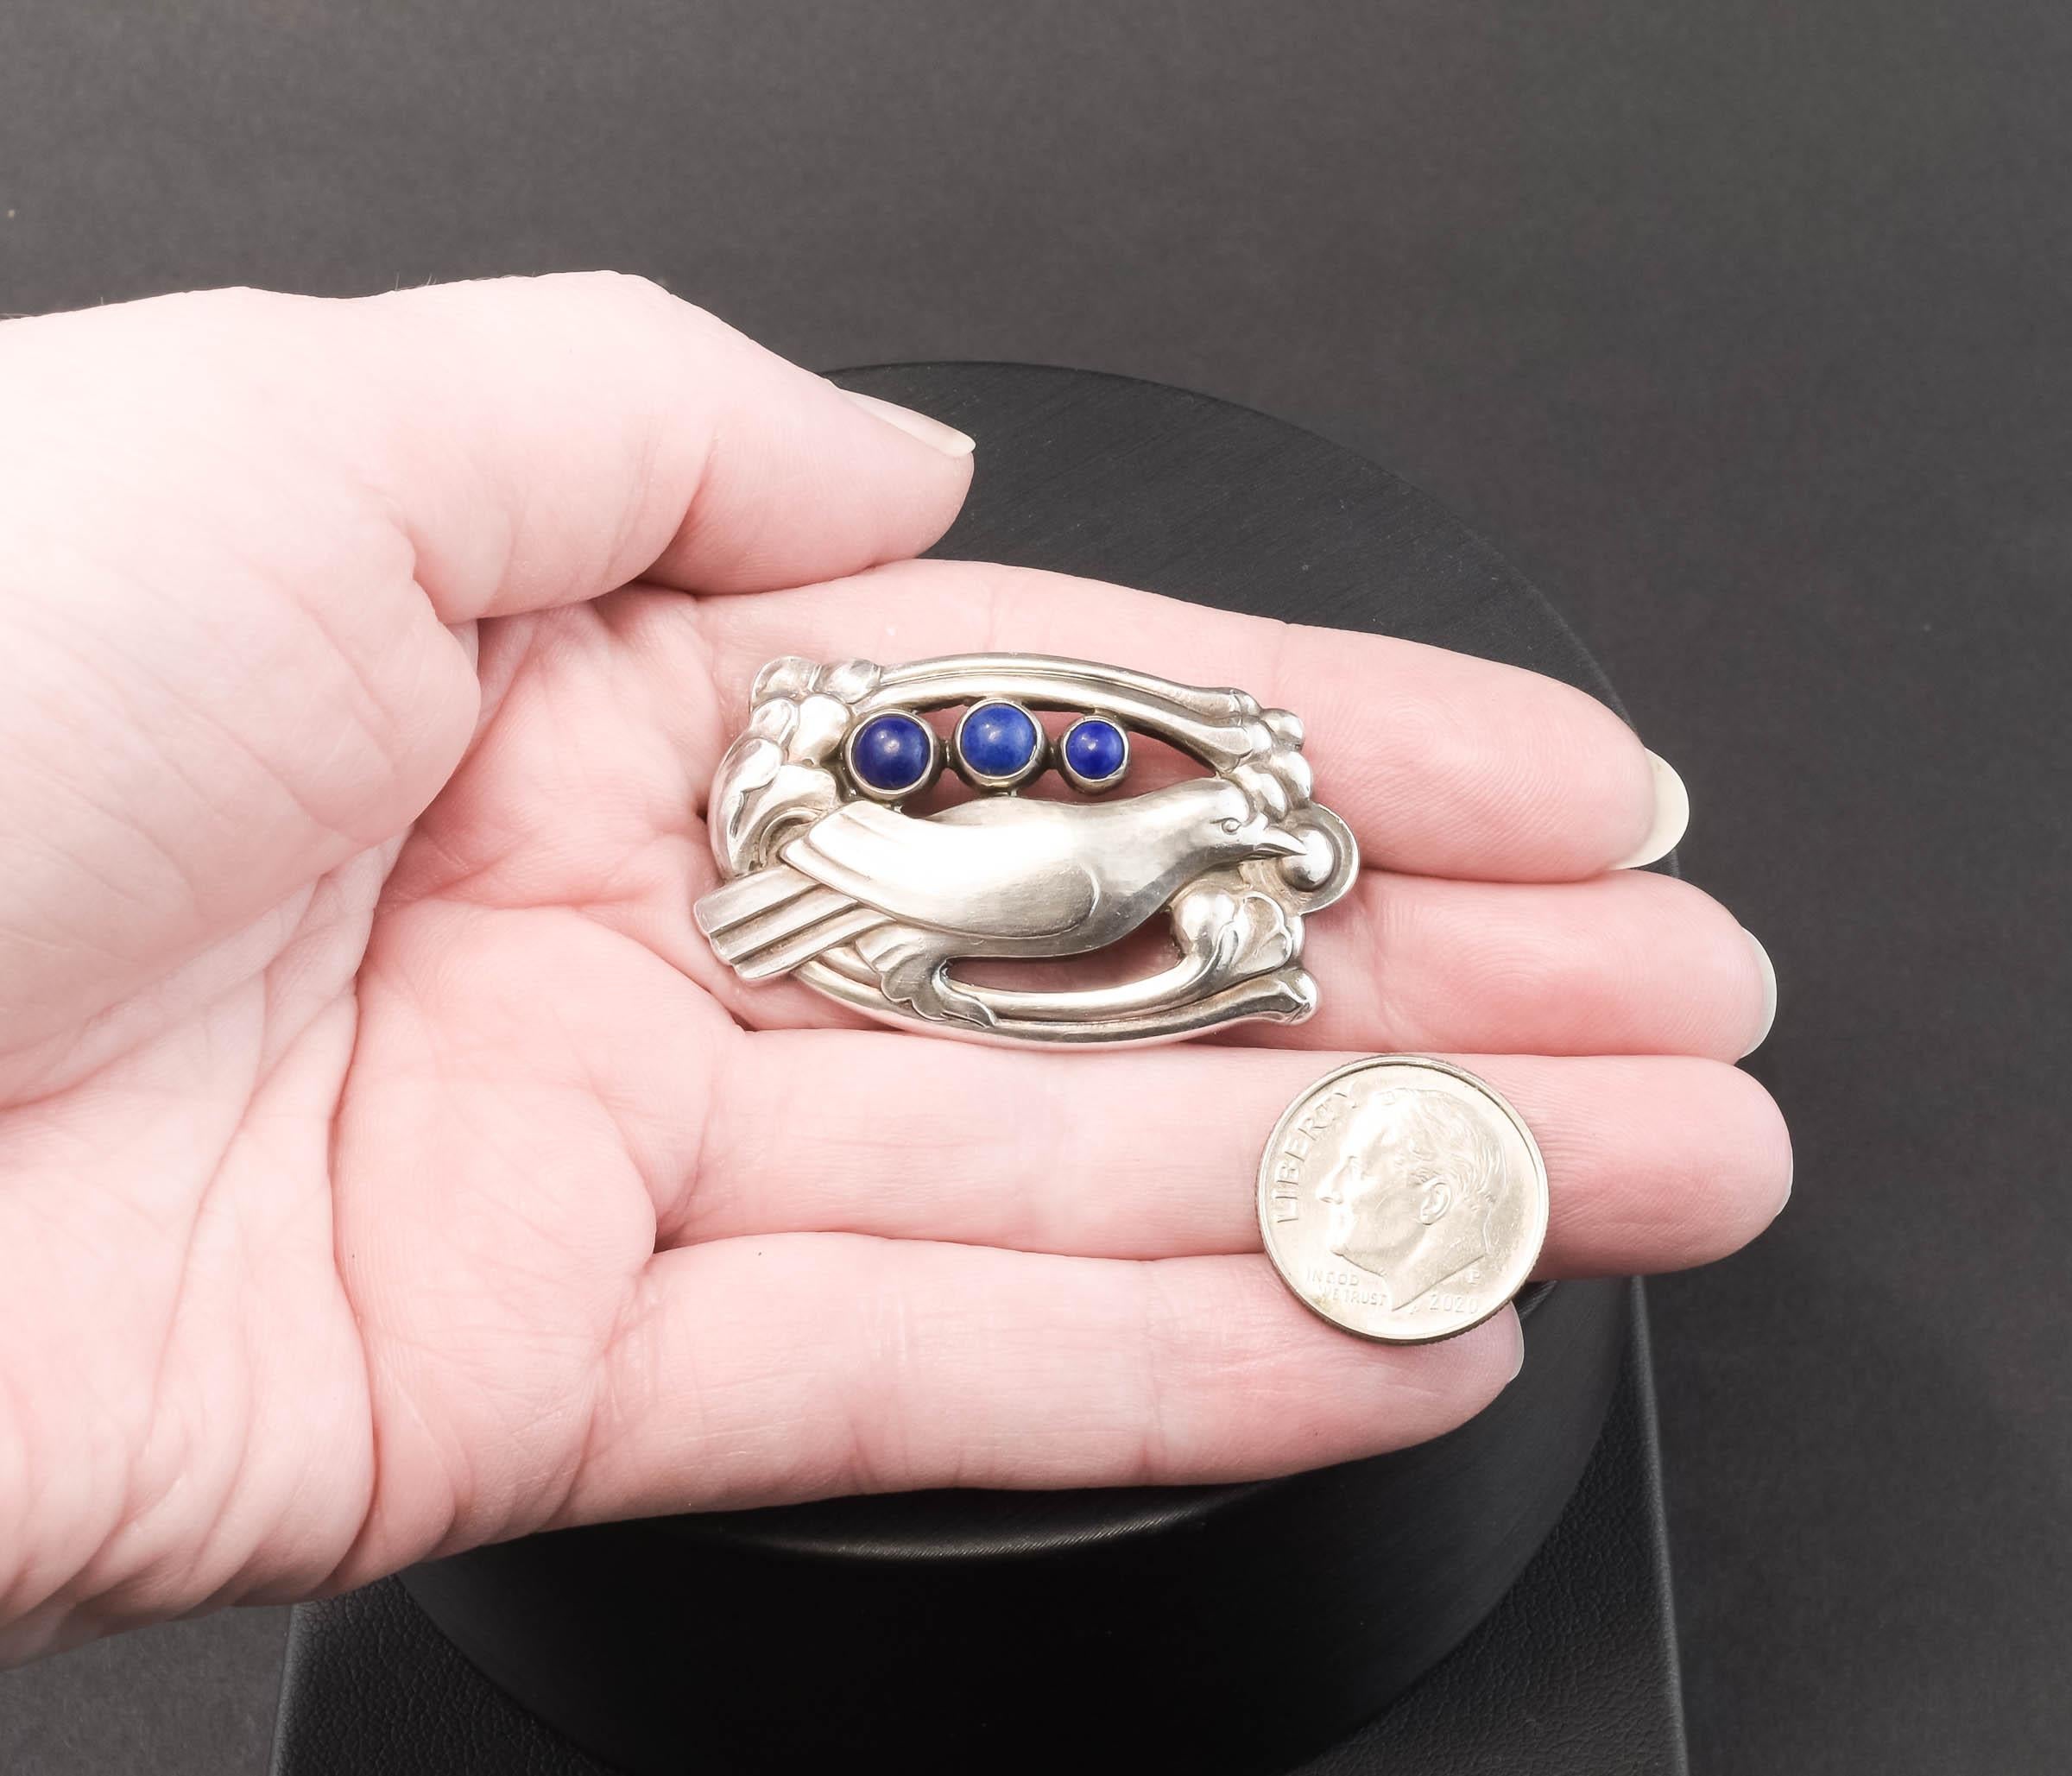 Cabochon Georg Jensen Sterling Silver Bird Brooch with Lapis Lazuli, circa 1933 - 1944 For Sale